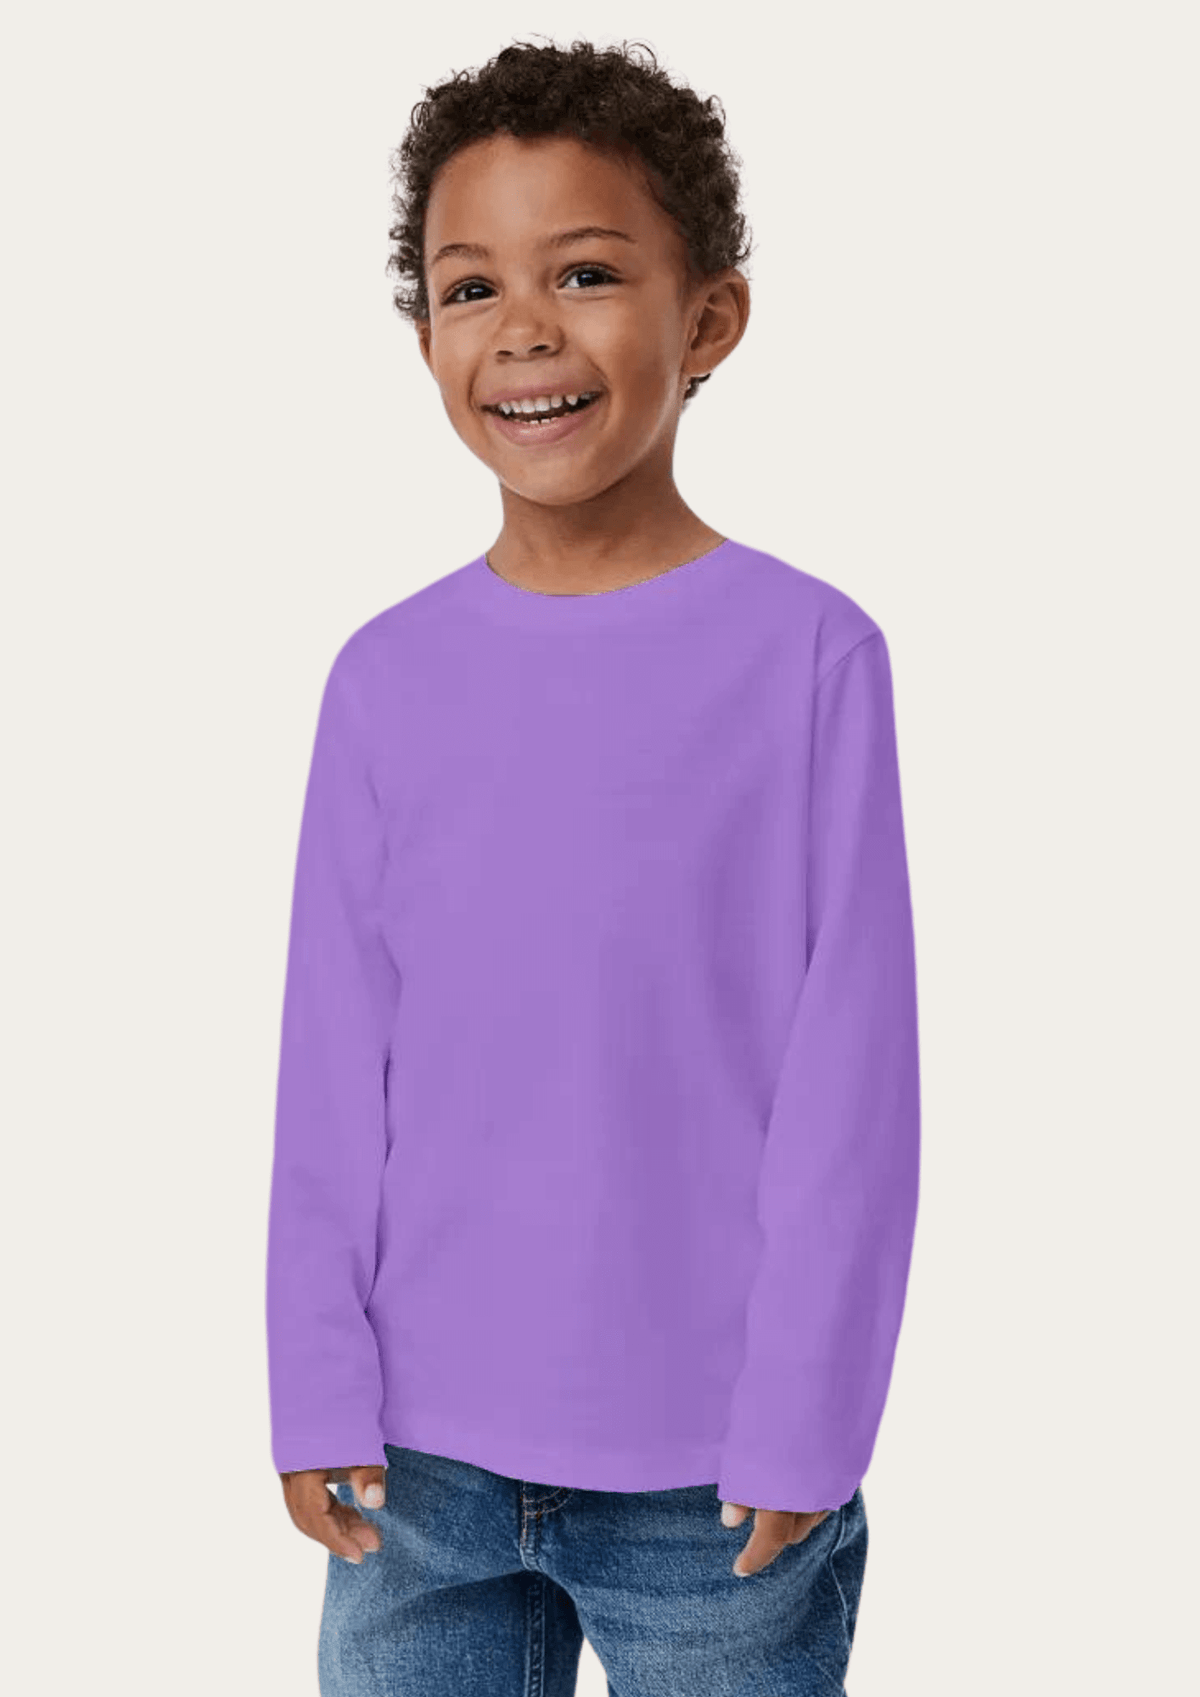 Lavender Full Sleeves Kids T-shirt By Offmint